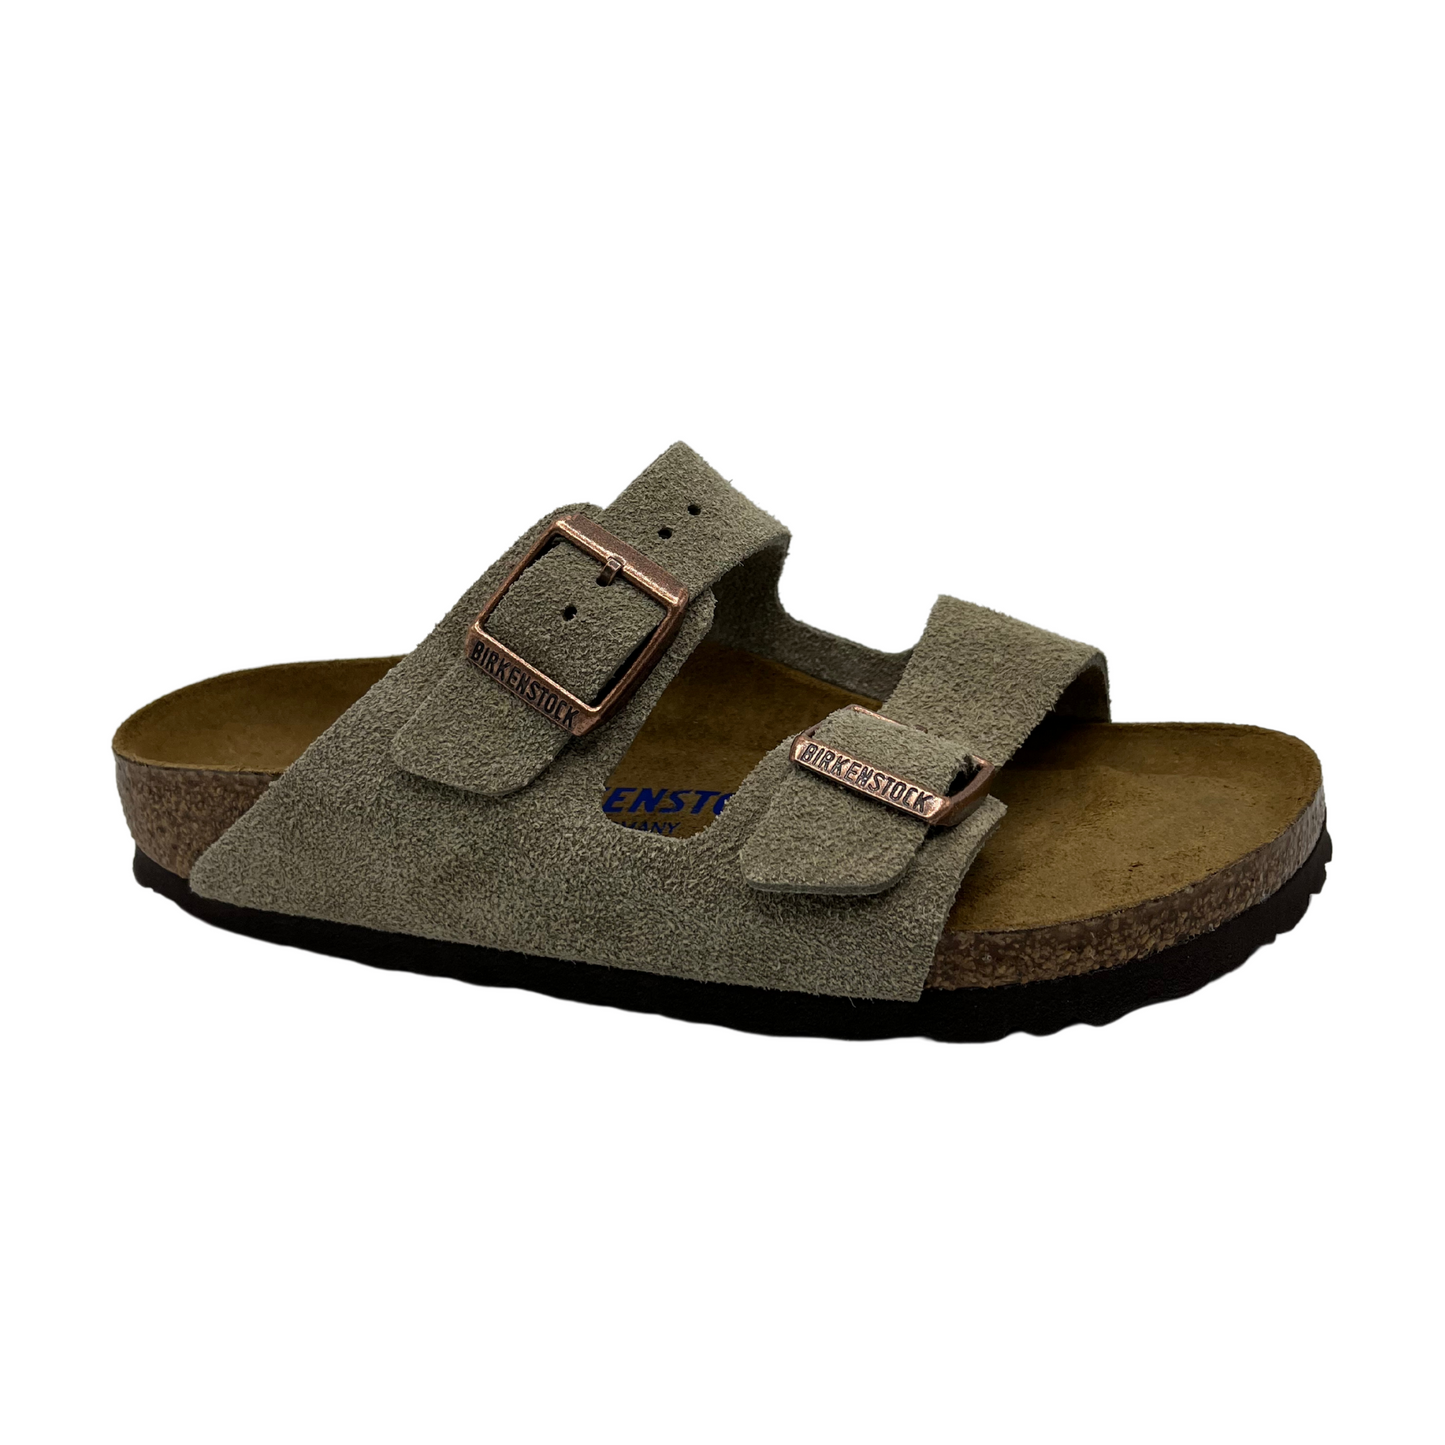 45 degree angled view of contoured footbed sandal with taupe straps and silver buckles